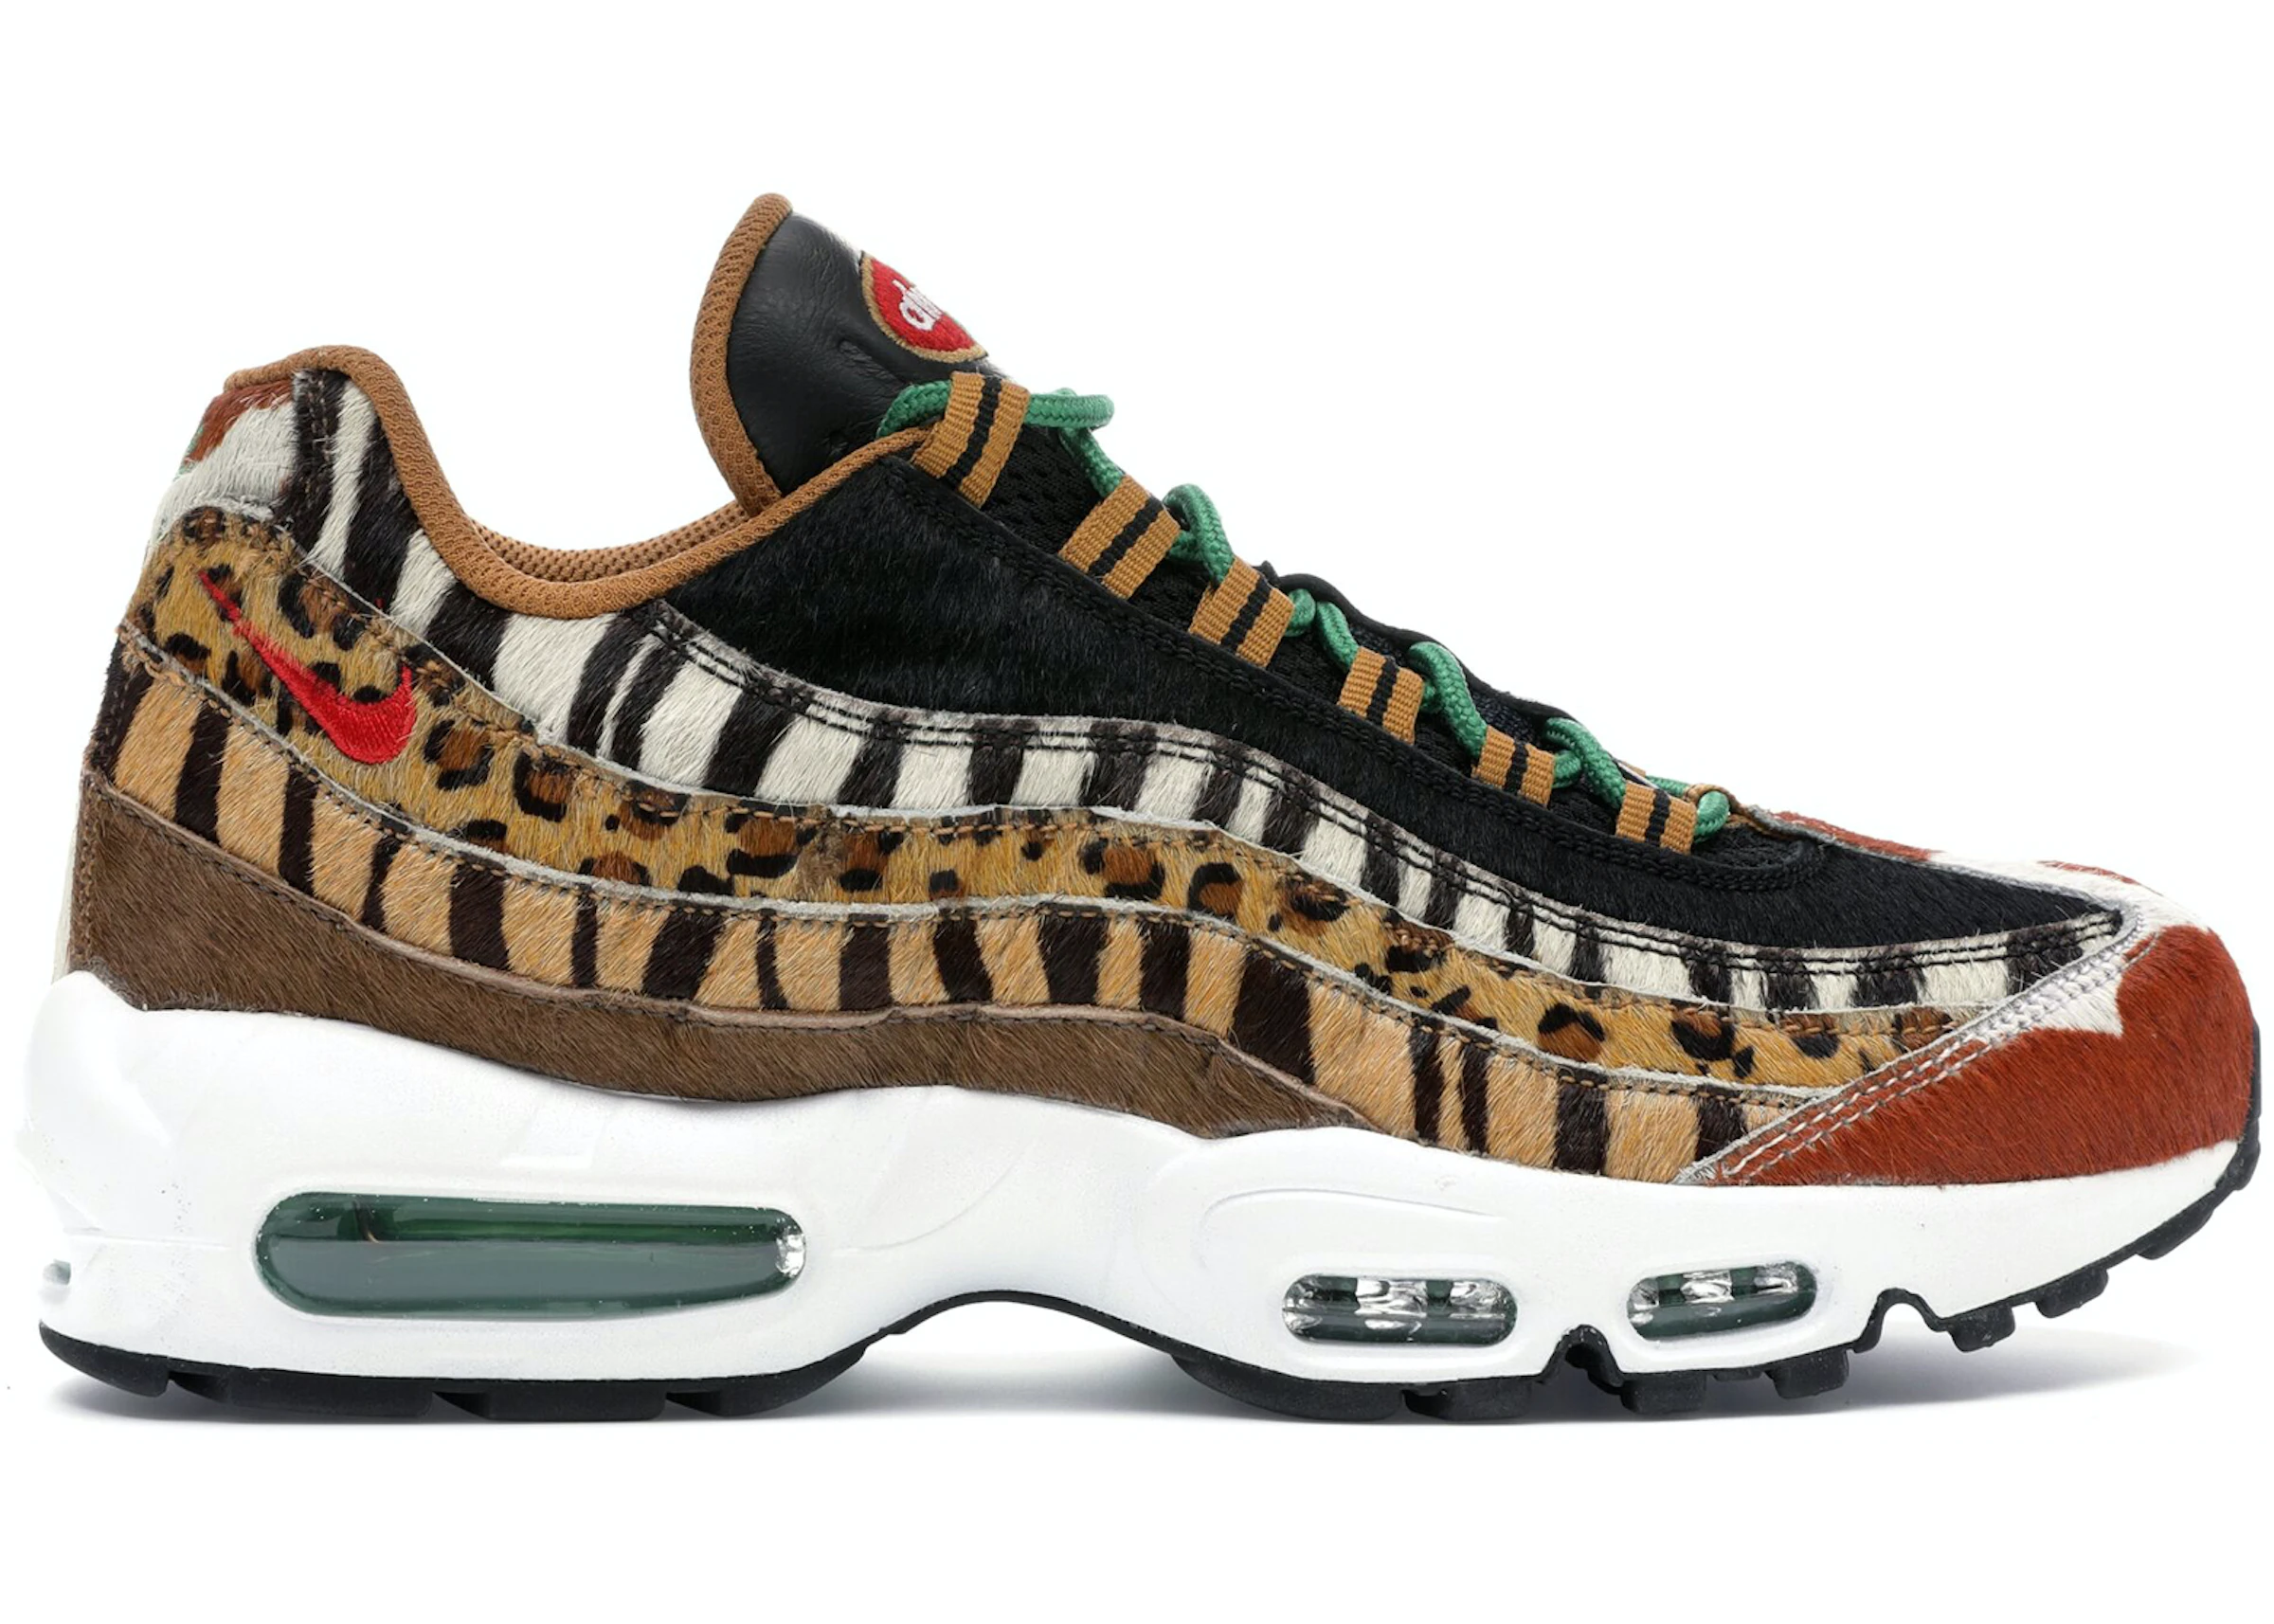 Buy gold air max 95 Nike Air Max 95 Shoes & New Sneakers - StockX